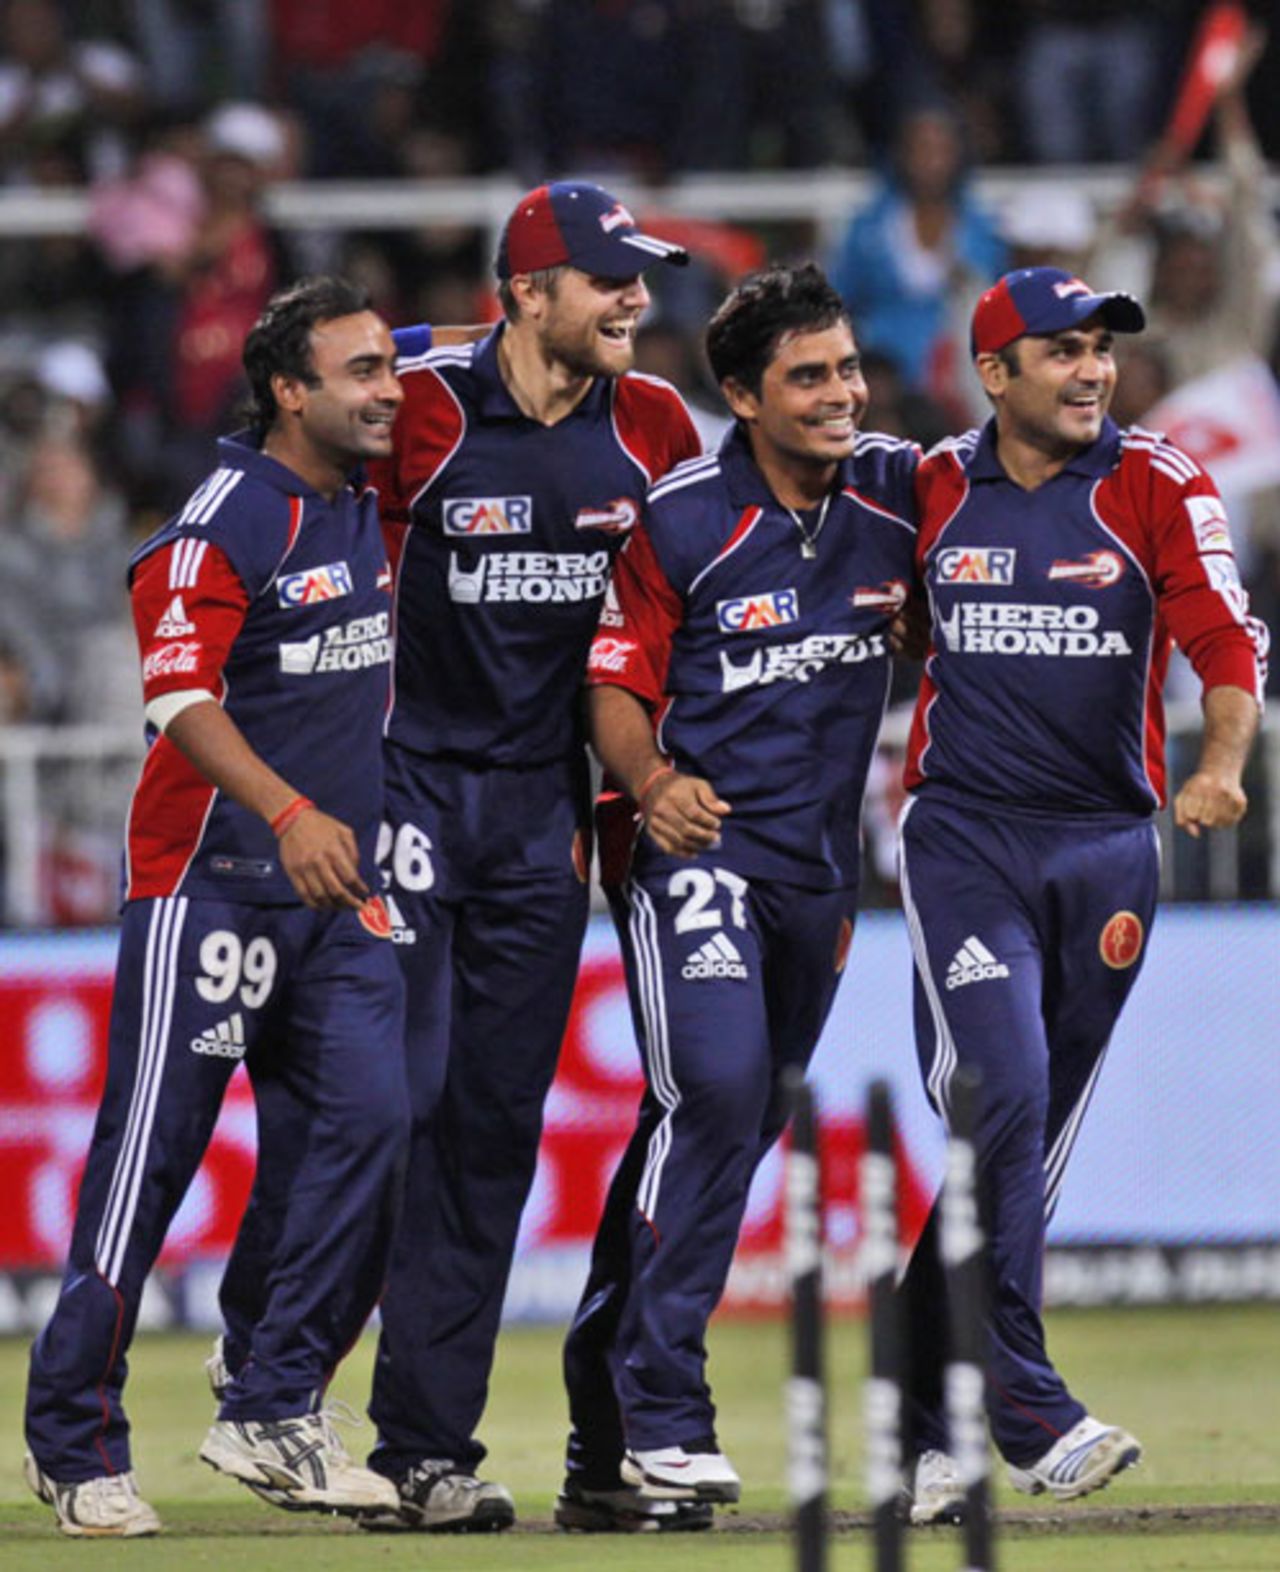 Amit Mishra, Dirk Nannes, Rajat Bhatia and Virender Sehwag are all smiles after pulling off a tight win, Deccan Chargers v Delhi Daredevils, IPL, Durban, May 13, 2009